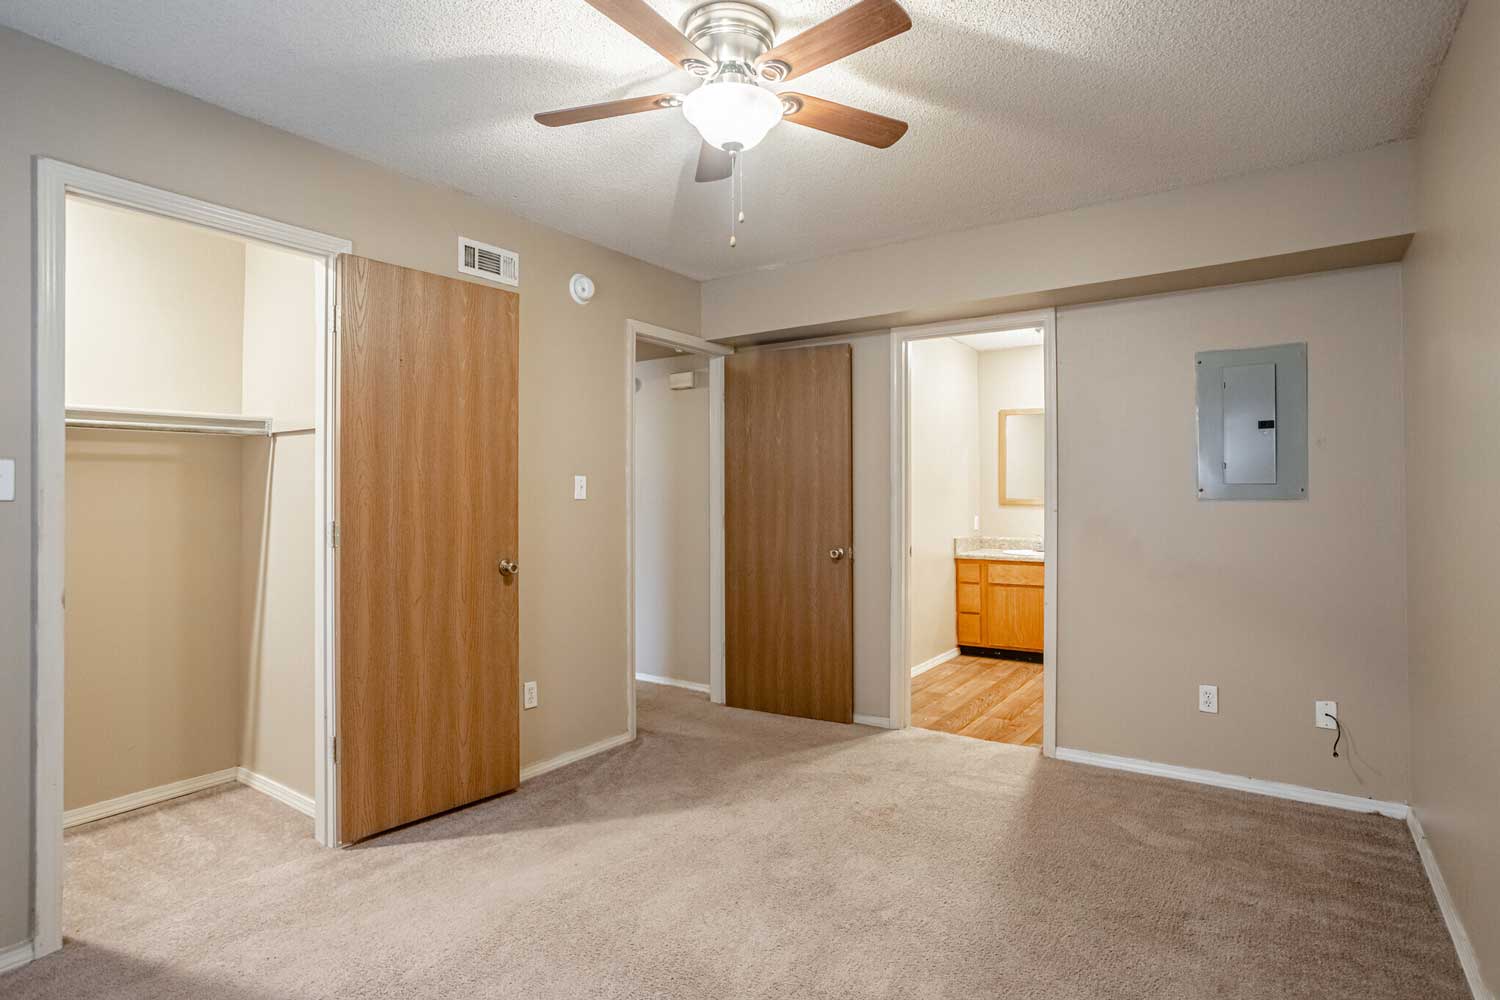 Bedrooms with Walk-in Closets at Crown Ridge Apartments in Fayetteville Apartments